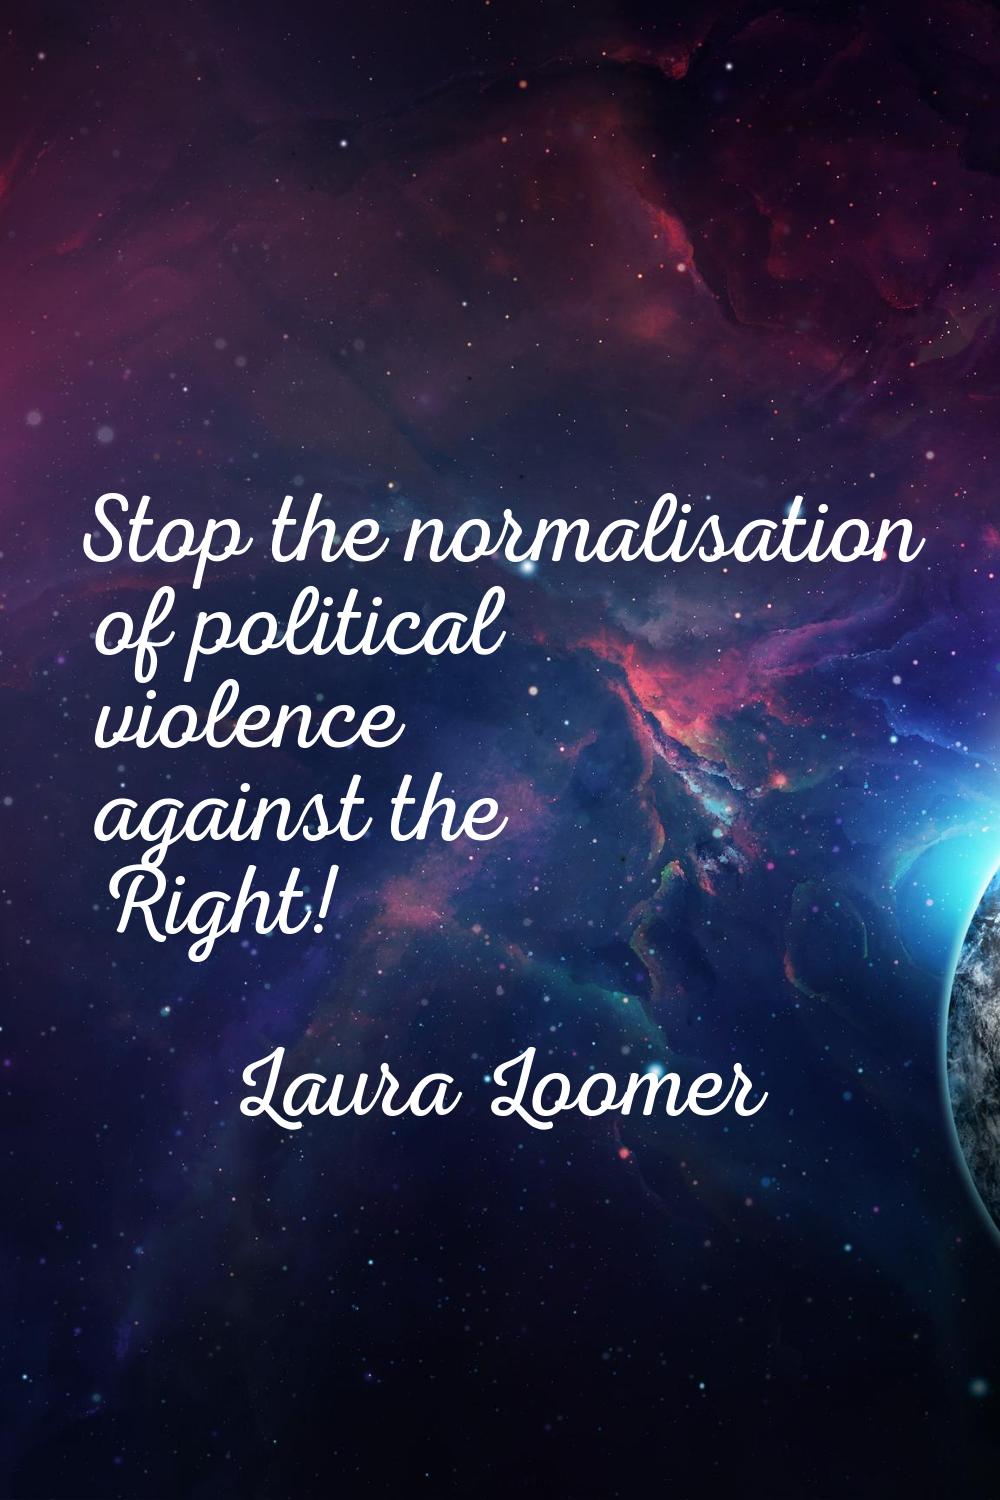 Stop the normalisation of political violence against the Right!